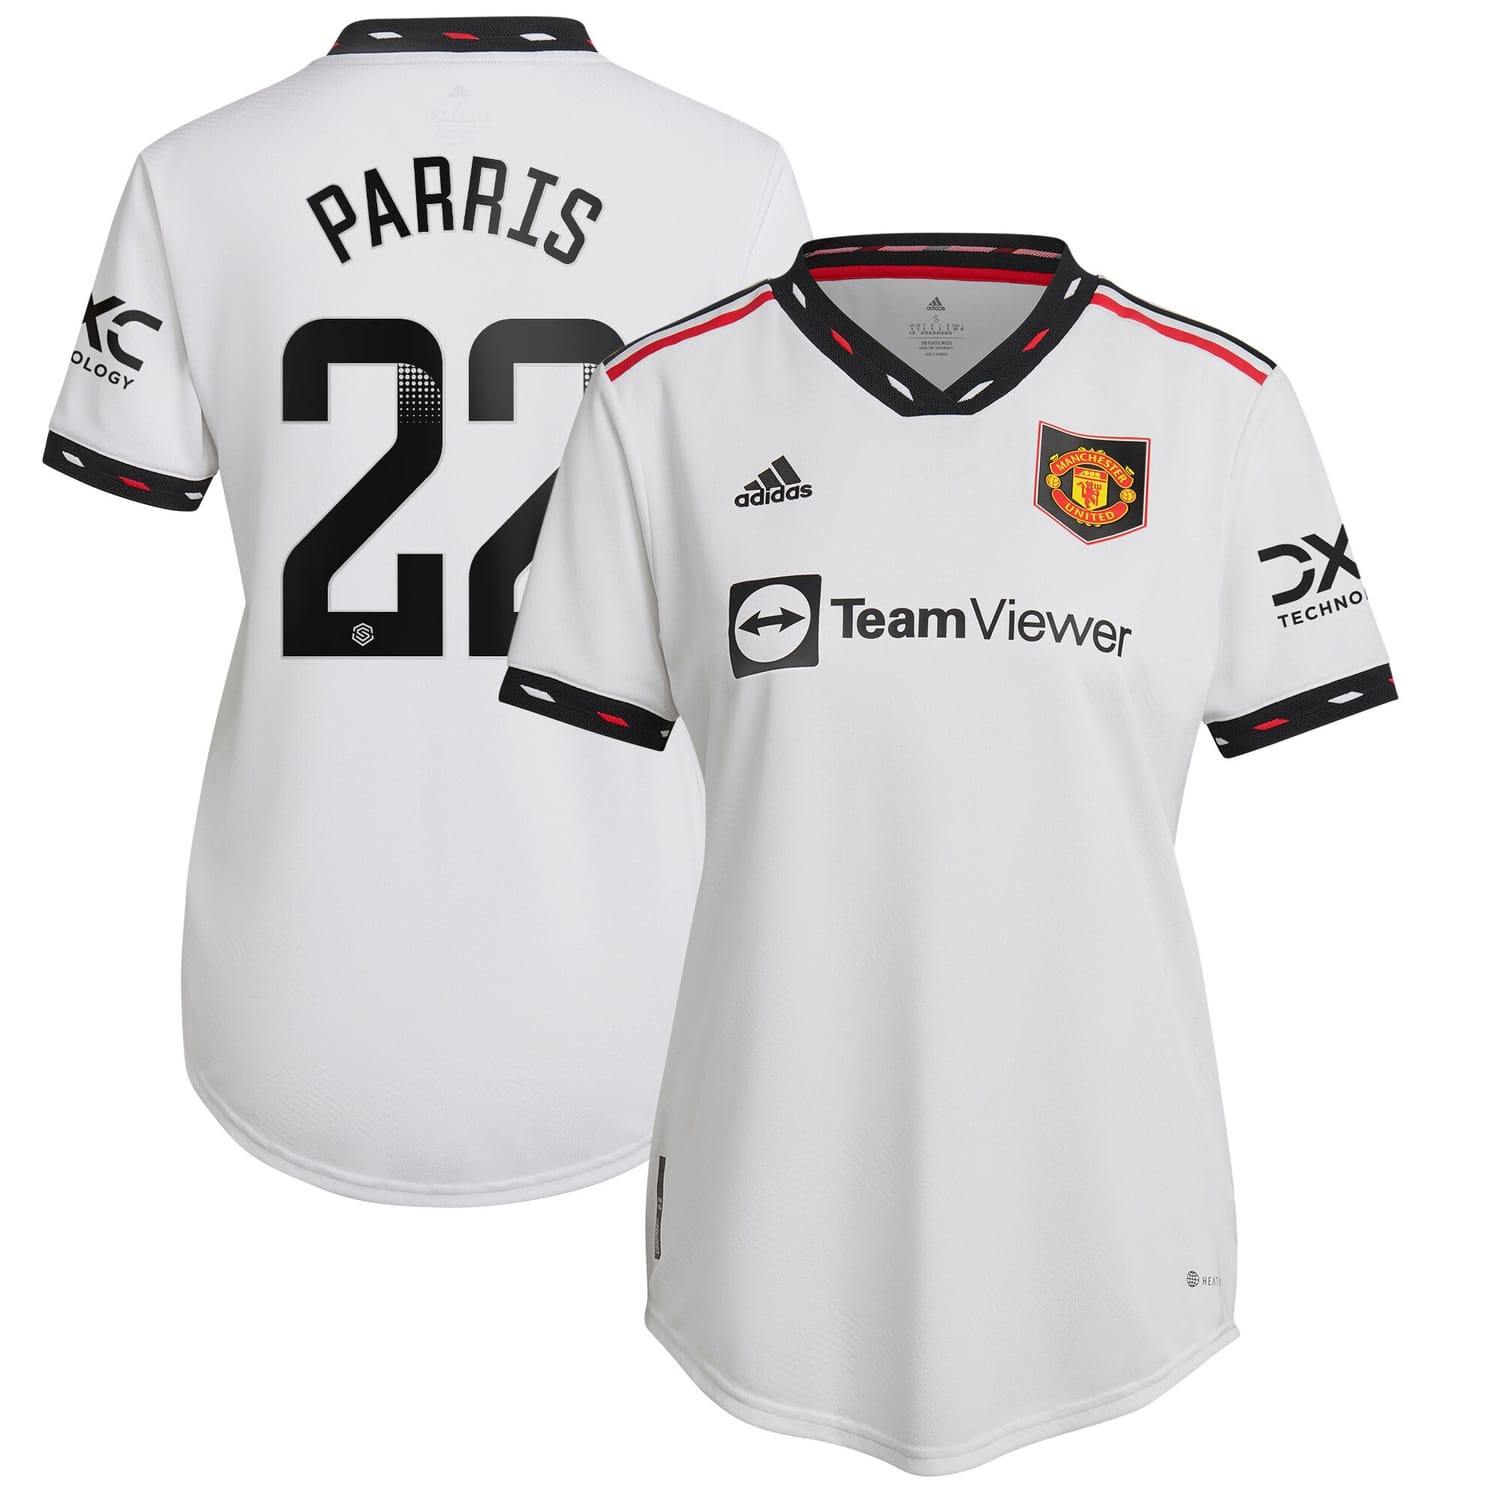 Premier League Manchester United Away WSL Authentic Jersey Shirt 2022-23 player Nikita Parris 22 printing for Women